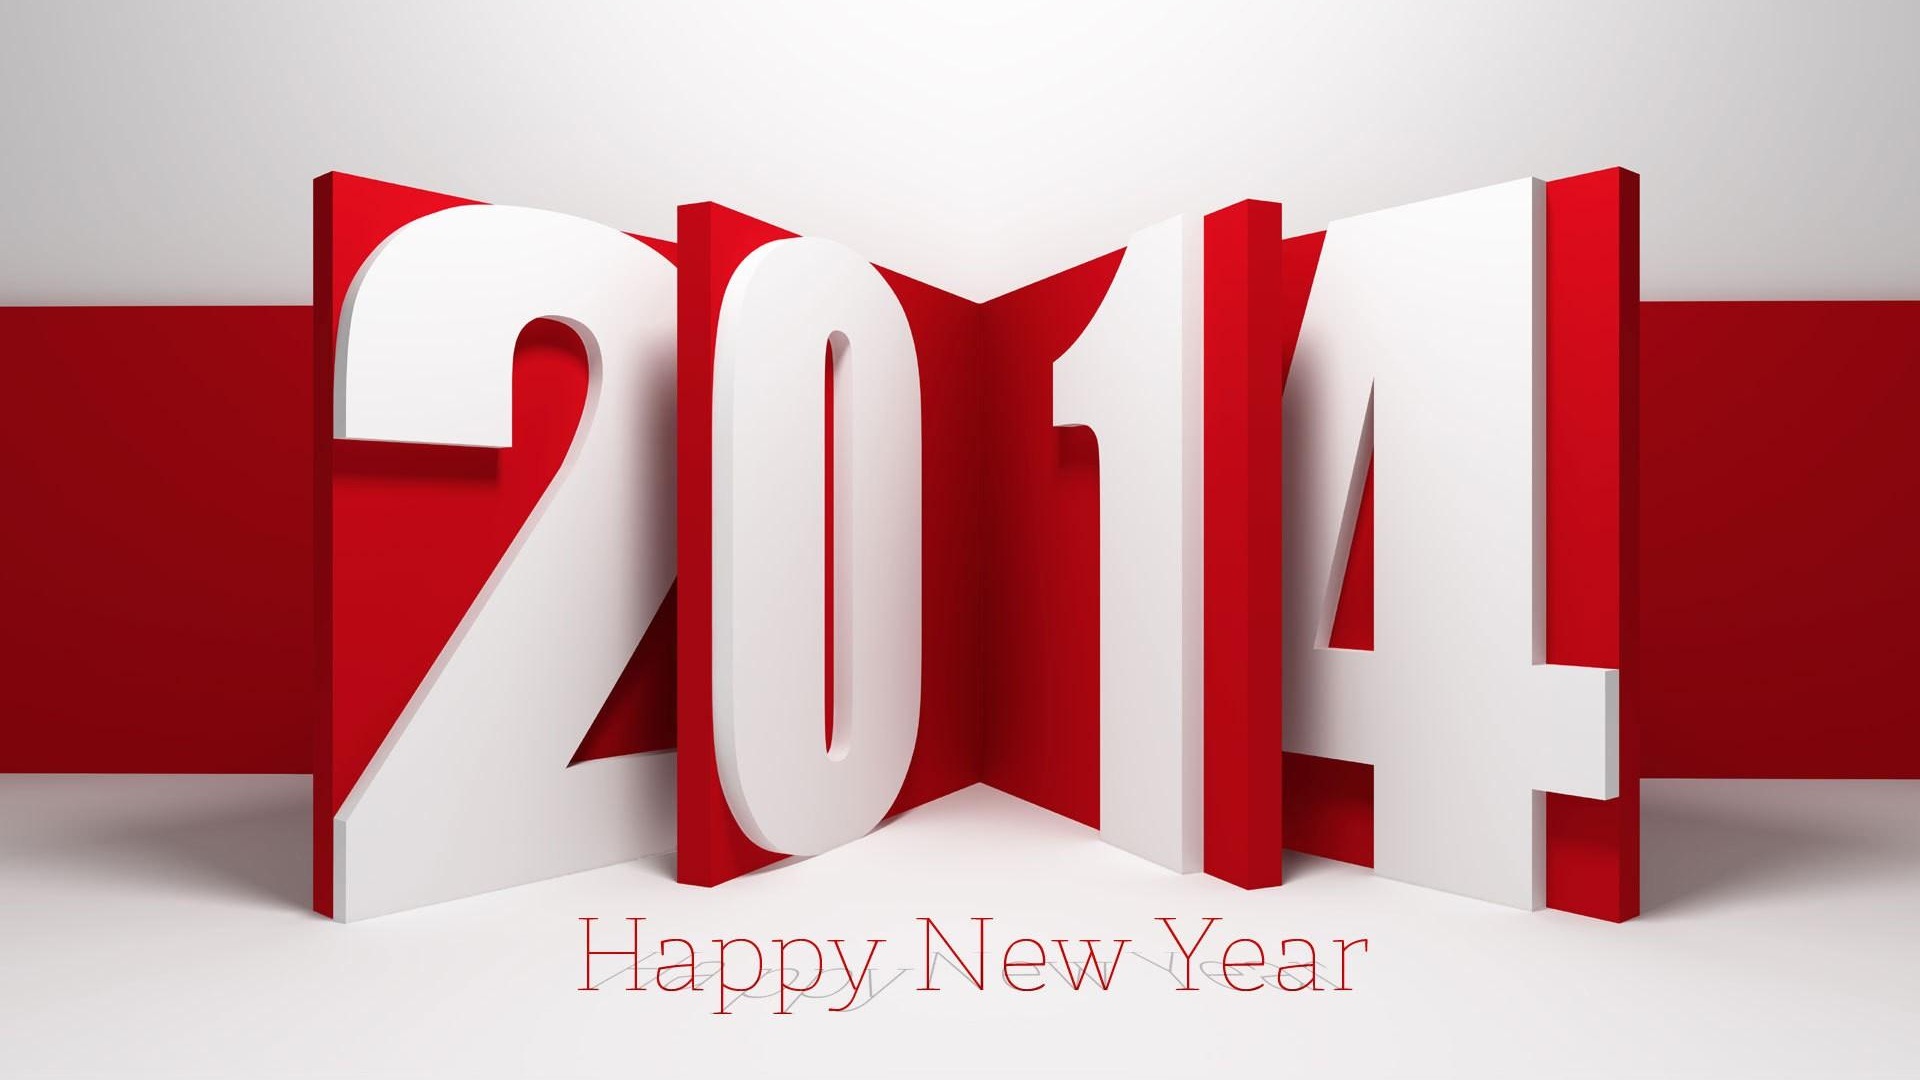 2014 New Year Theme HD Wallpapers (2) #14 - 1920x1080